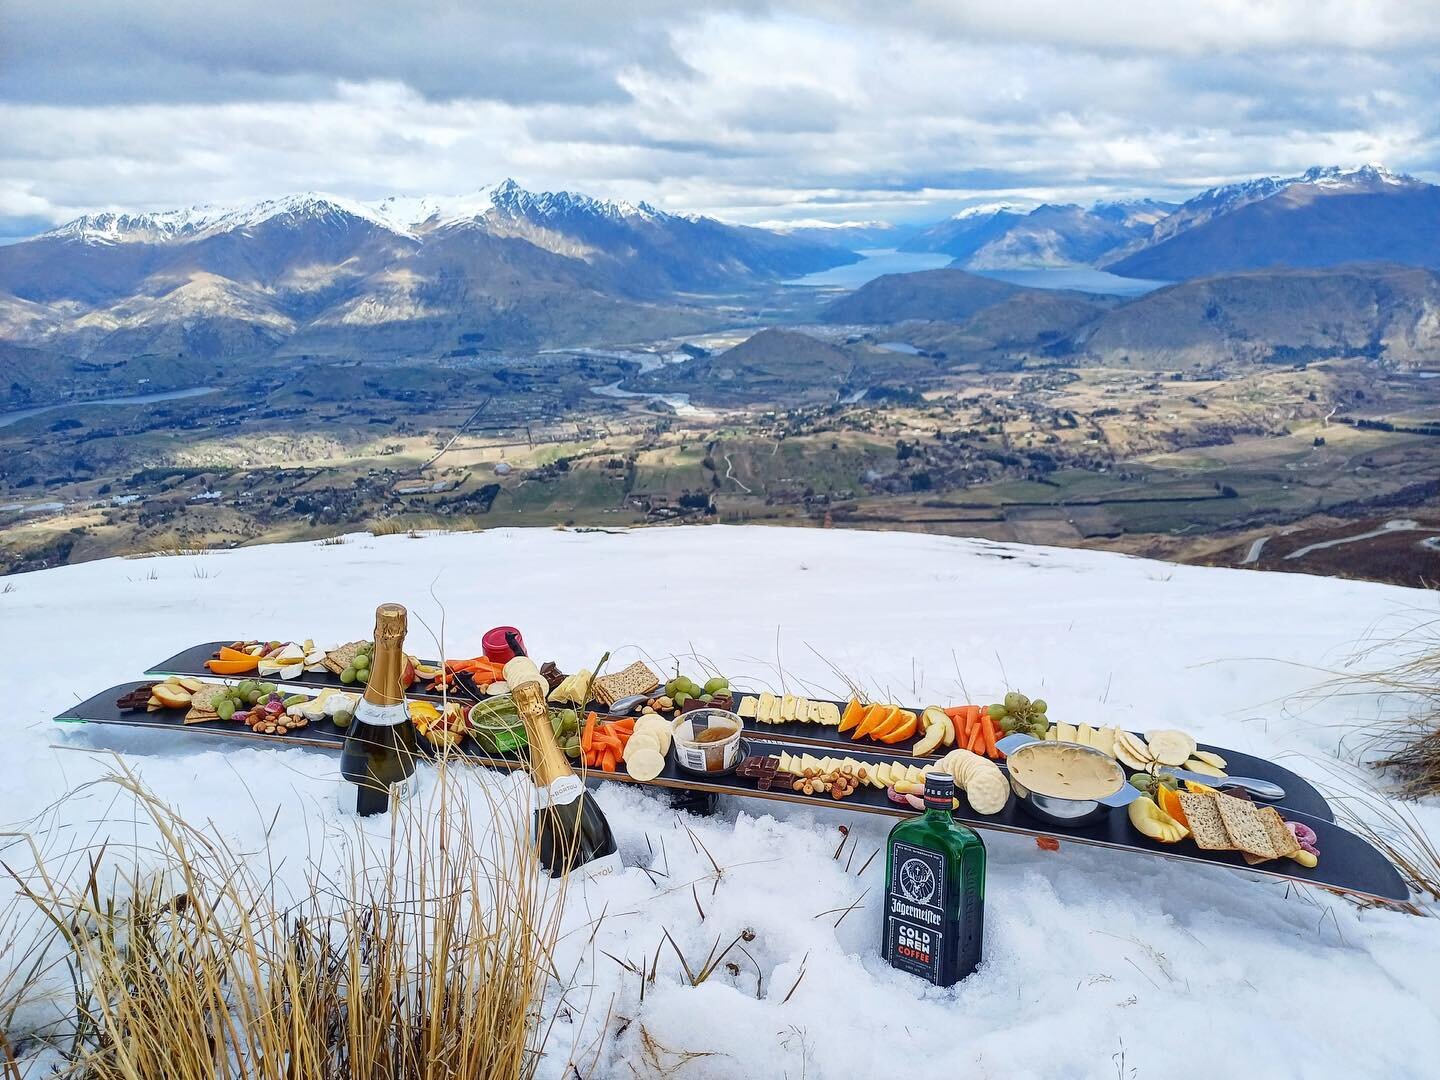 Night ski fuelin&rsquo; 
&bull;
A range of cheeses, crackers, dips, fruit, nuts, chocolate and lollies accompanied by some bubbles and J&auml;germeister on @kingswoodskis handmade Unis.
&bull;
#charcuterieboards #charcuterie #skiing #snowboarding #ch